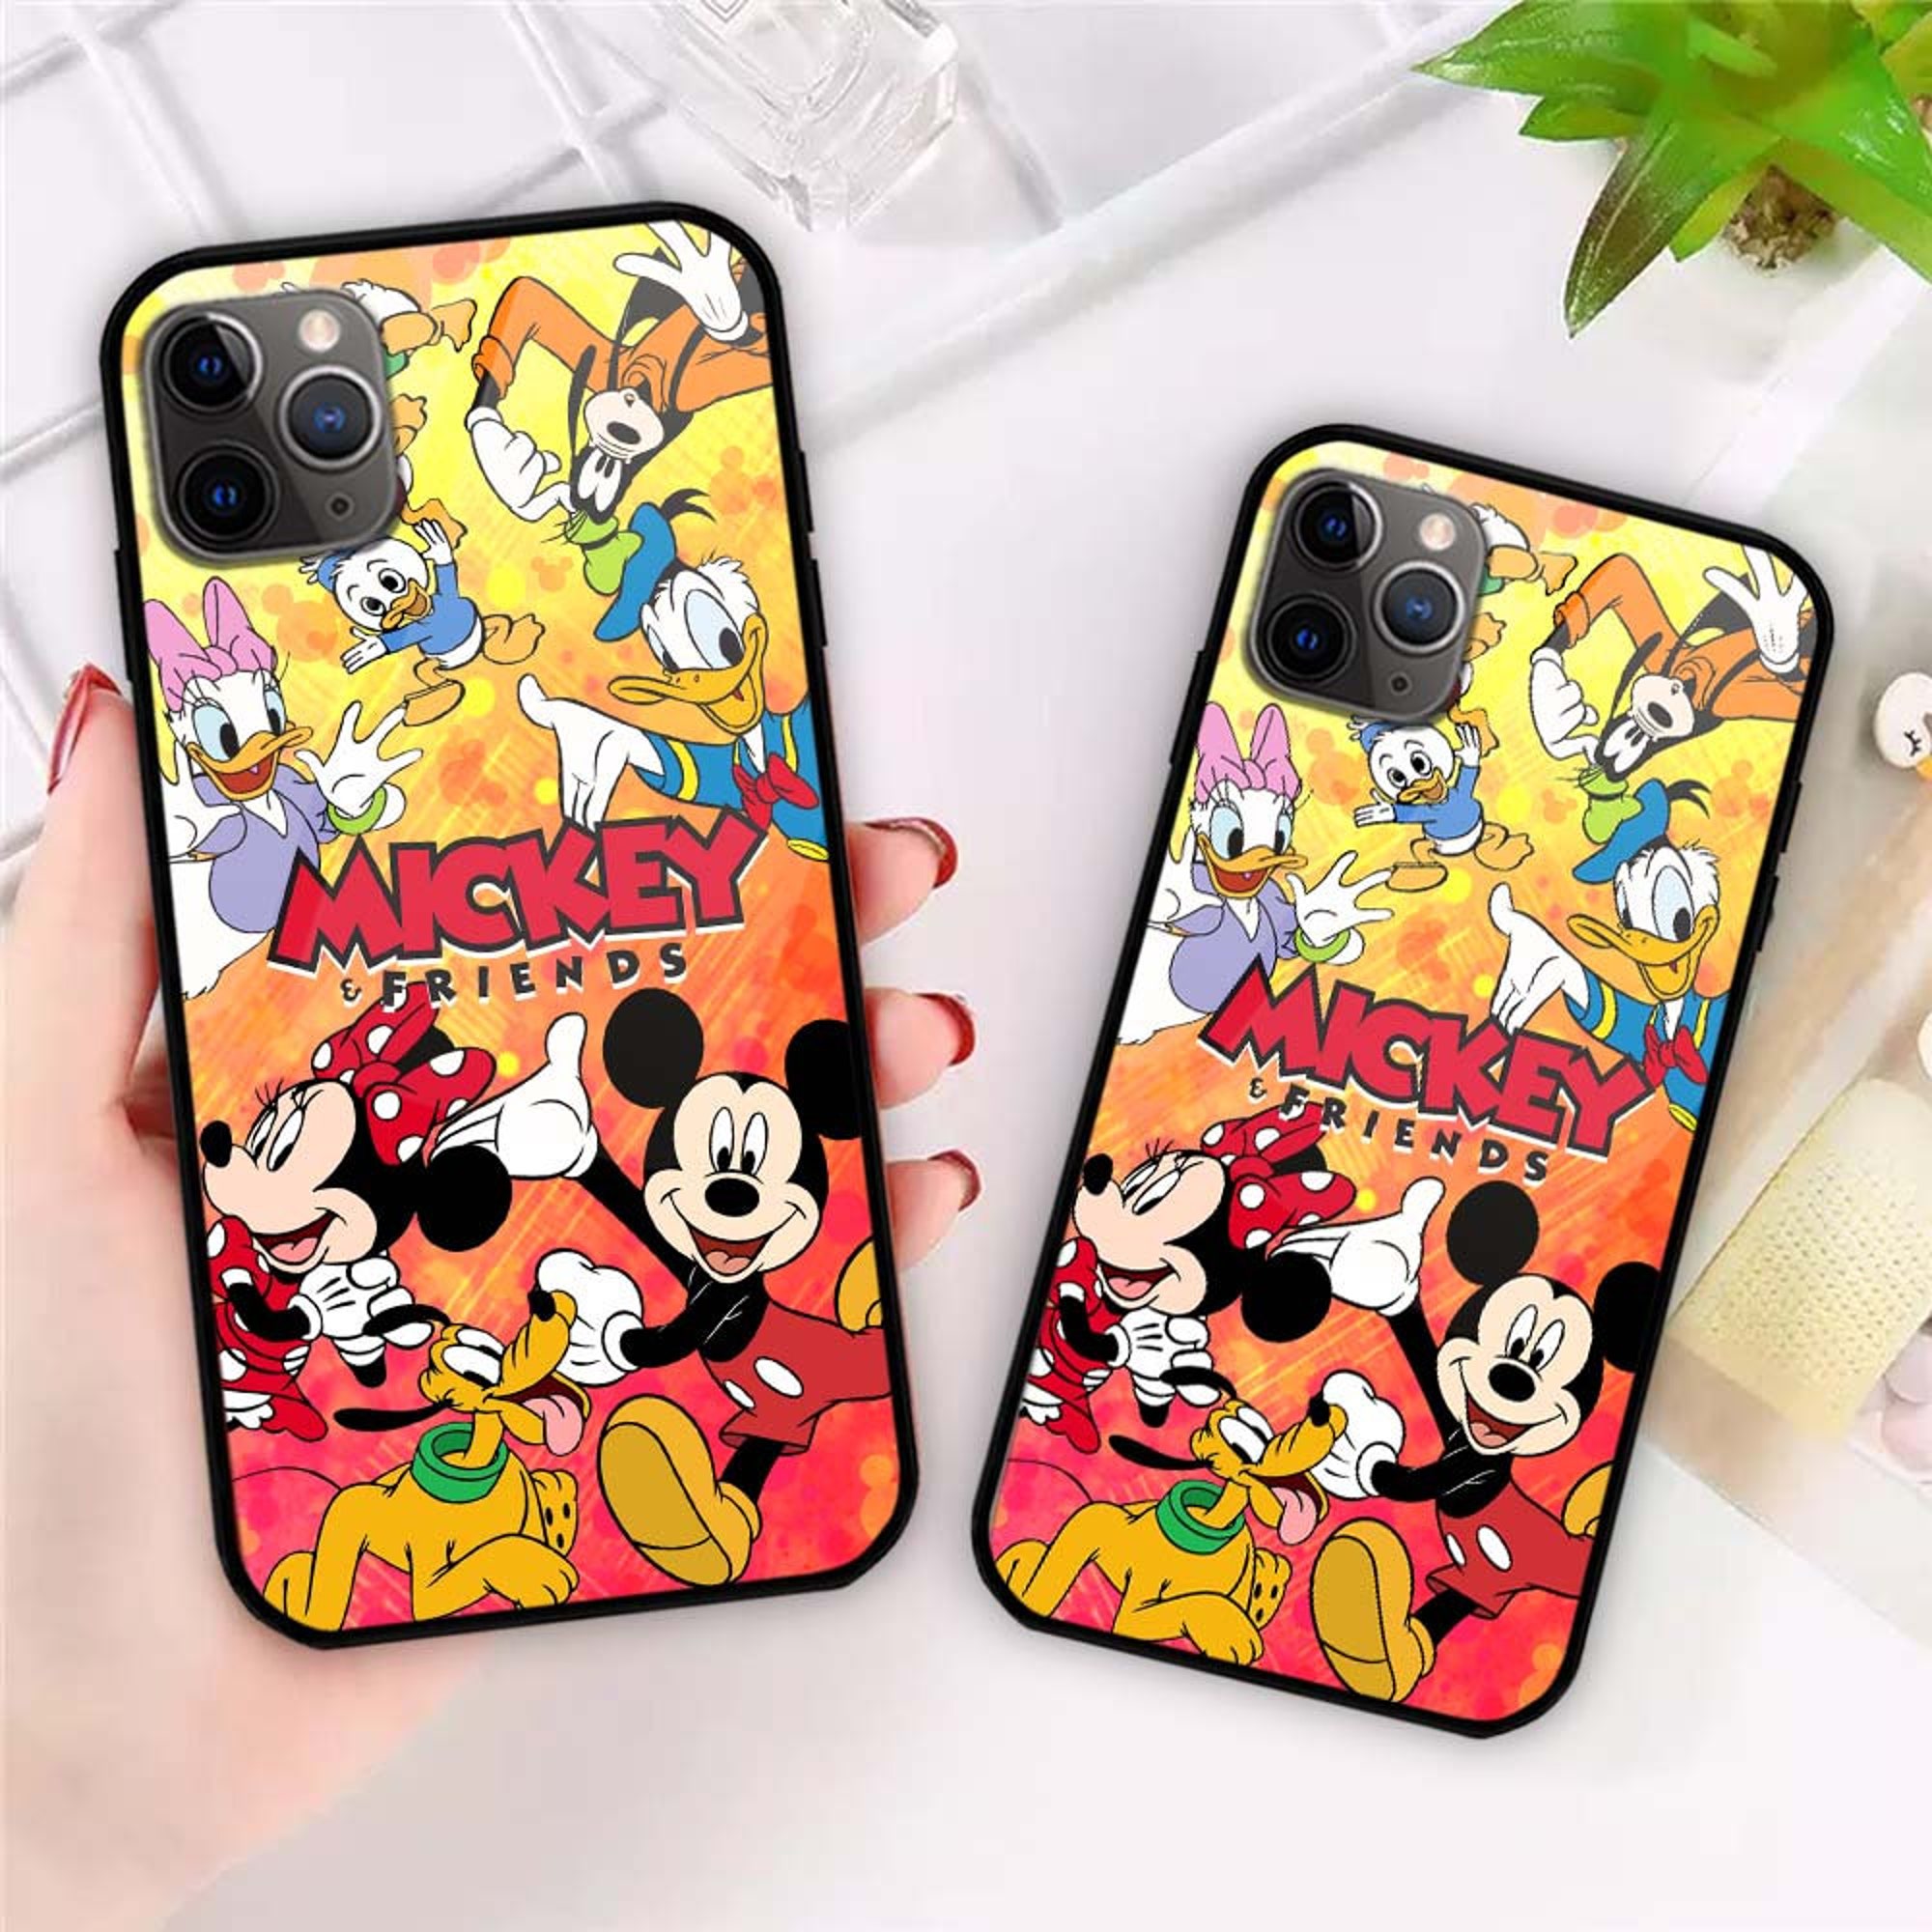 Disney Mickey Mouse & Friends Phone Case iPhone 6,7,8,X,XS,XR,11,12,13